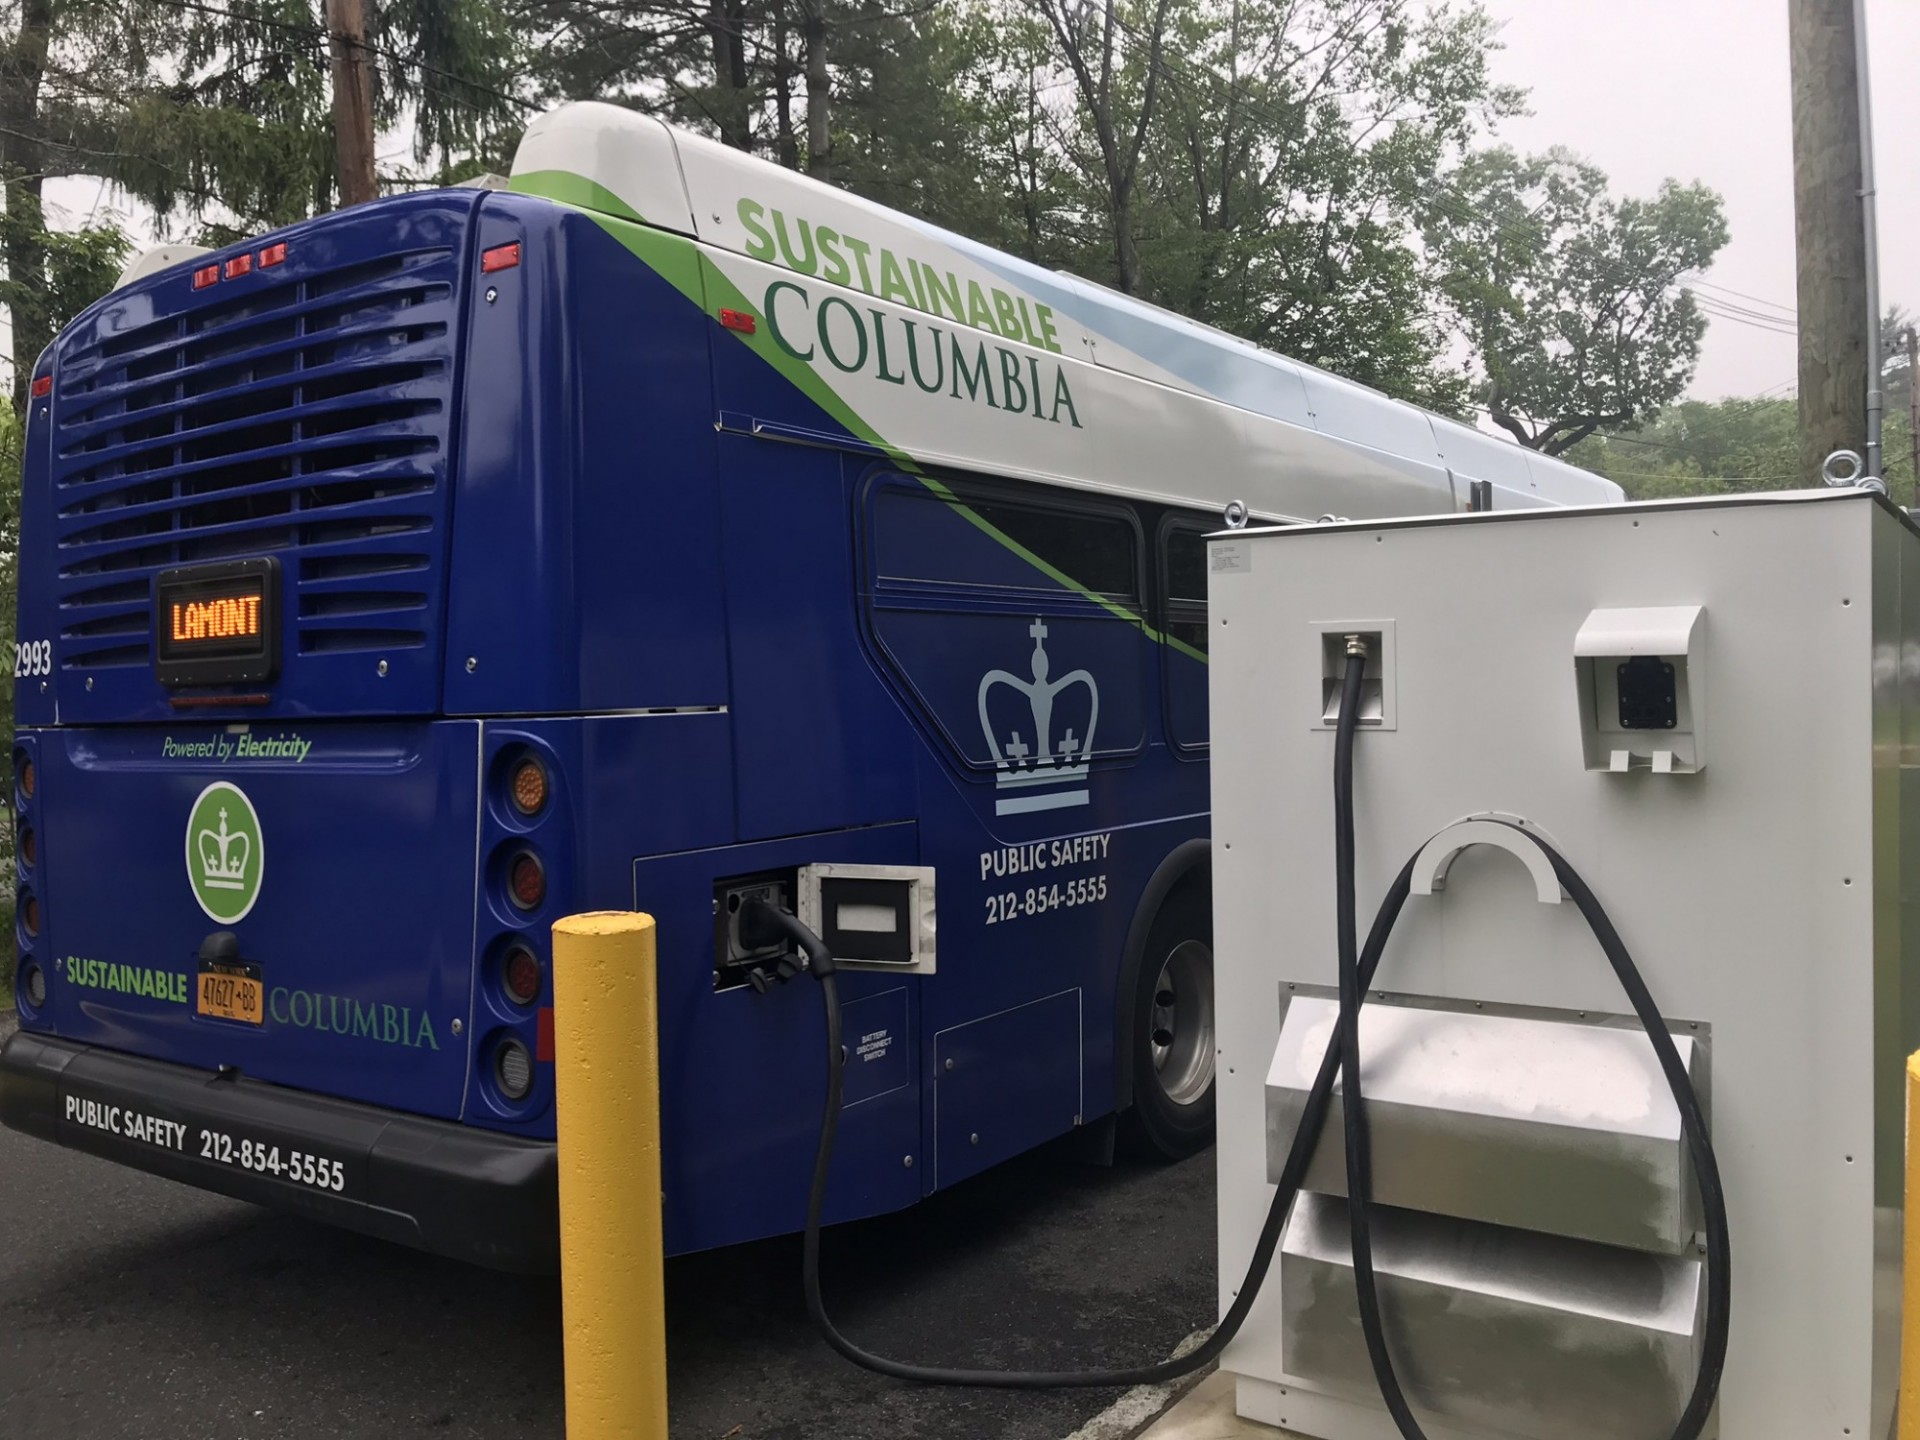 Electric bus charging at Lamont campus